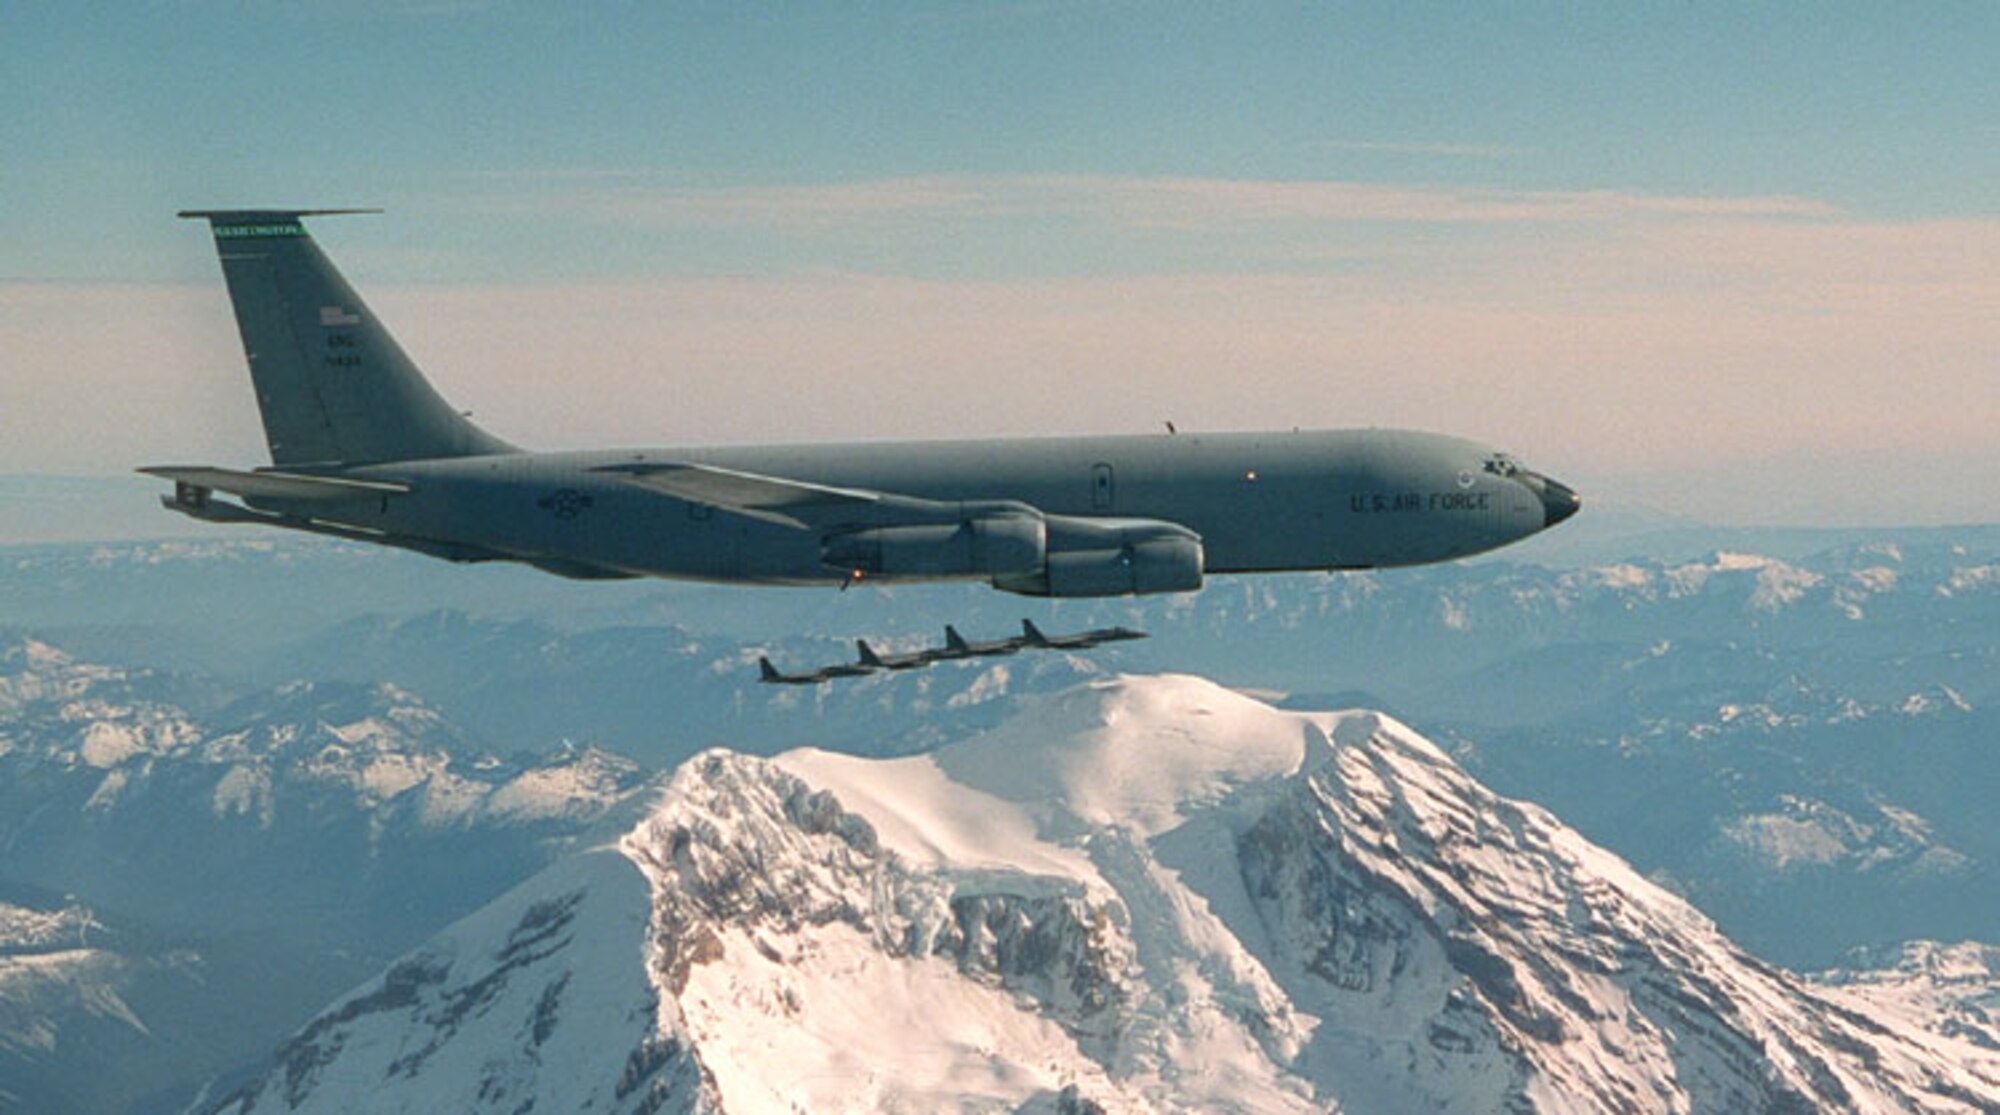 141st in action.  KC-135 doing its mission over Mt. Rainier.